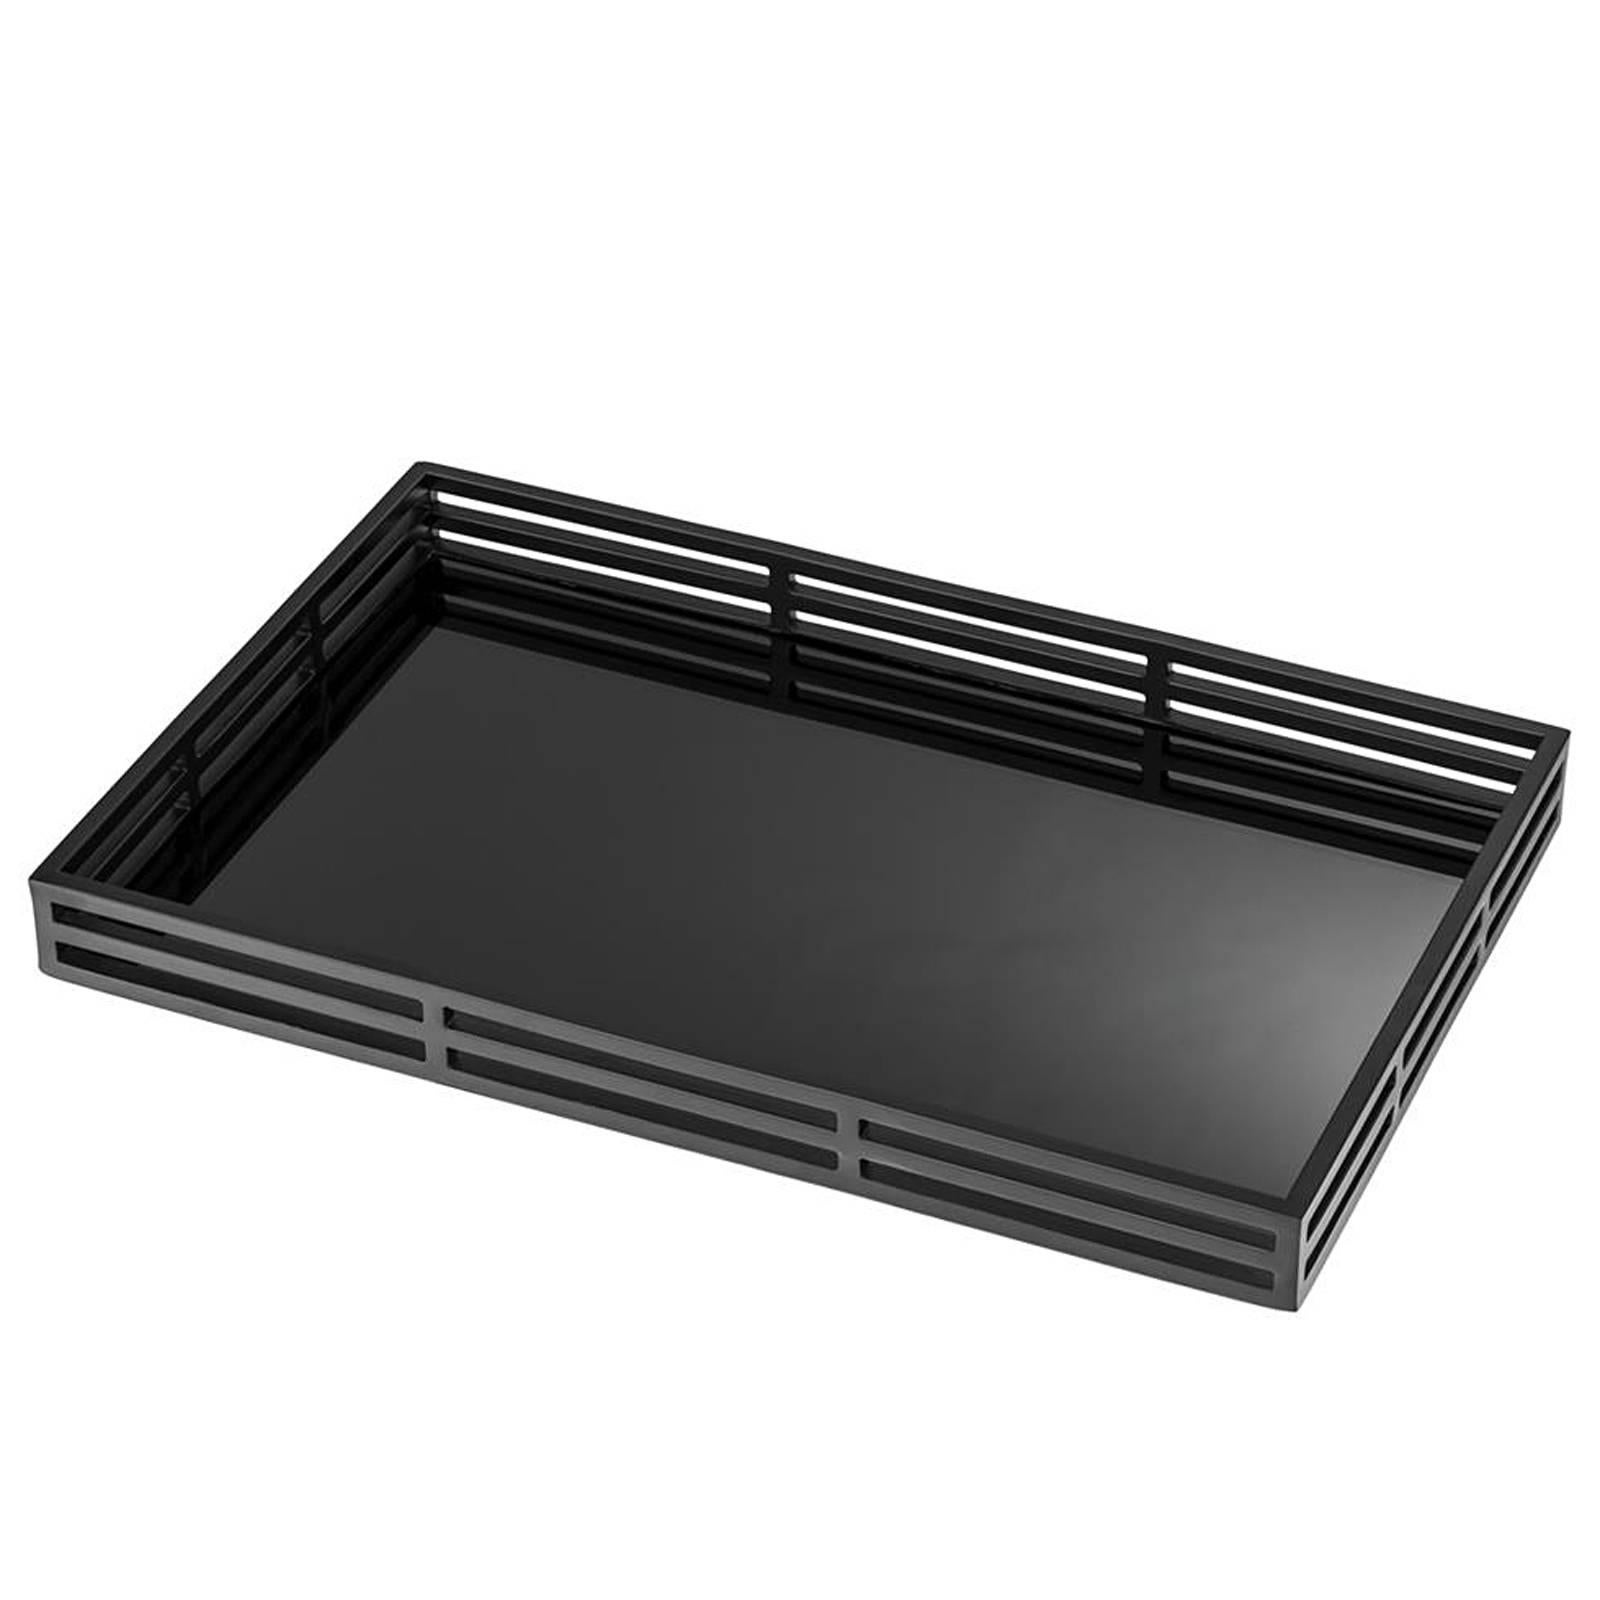 Tray black in stainless steel matte
black finish with black mirror glass.
